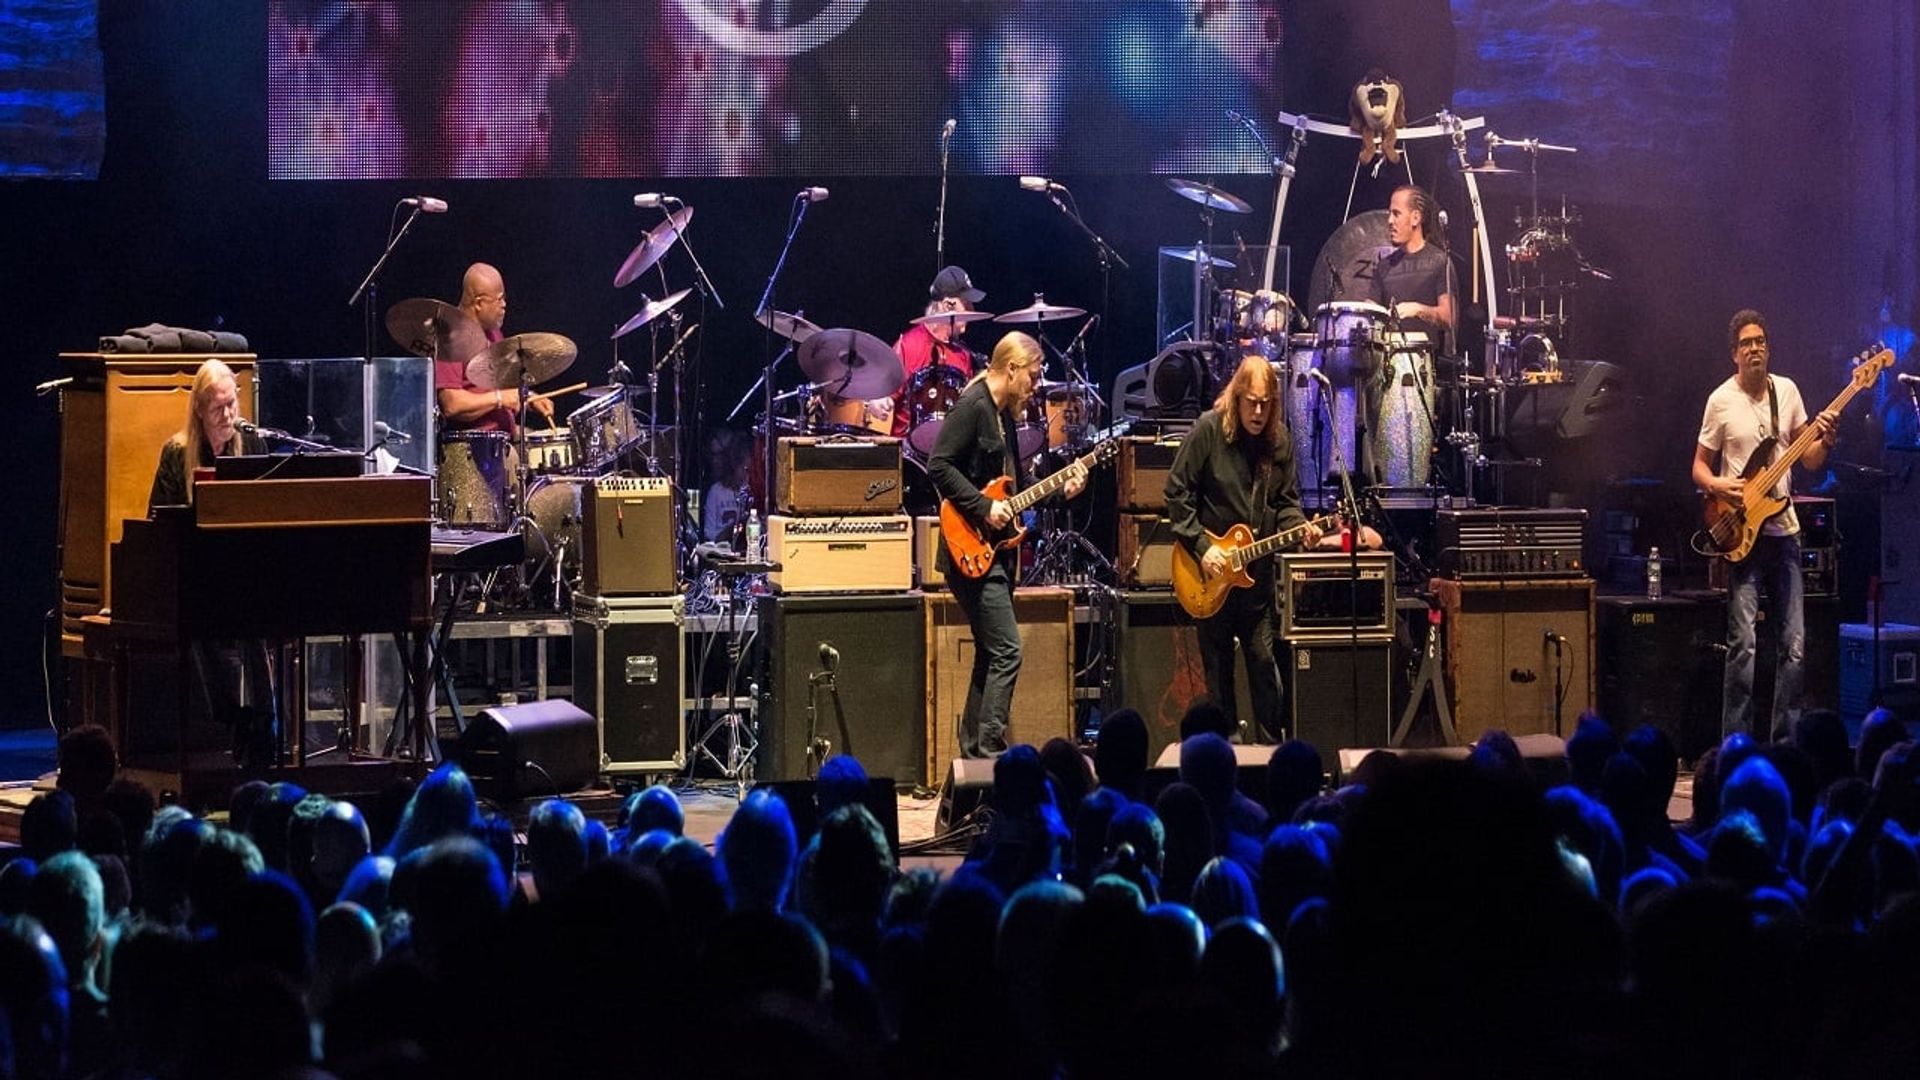 The Allman Brothers Band: Live at the Beacon Theatre background